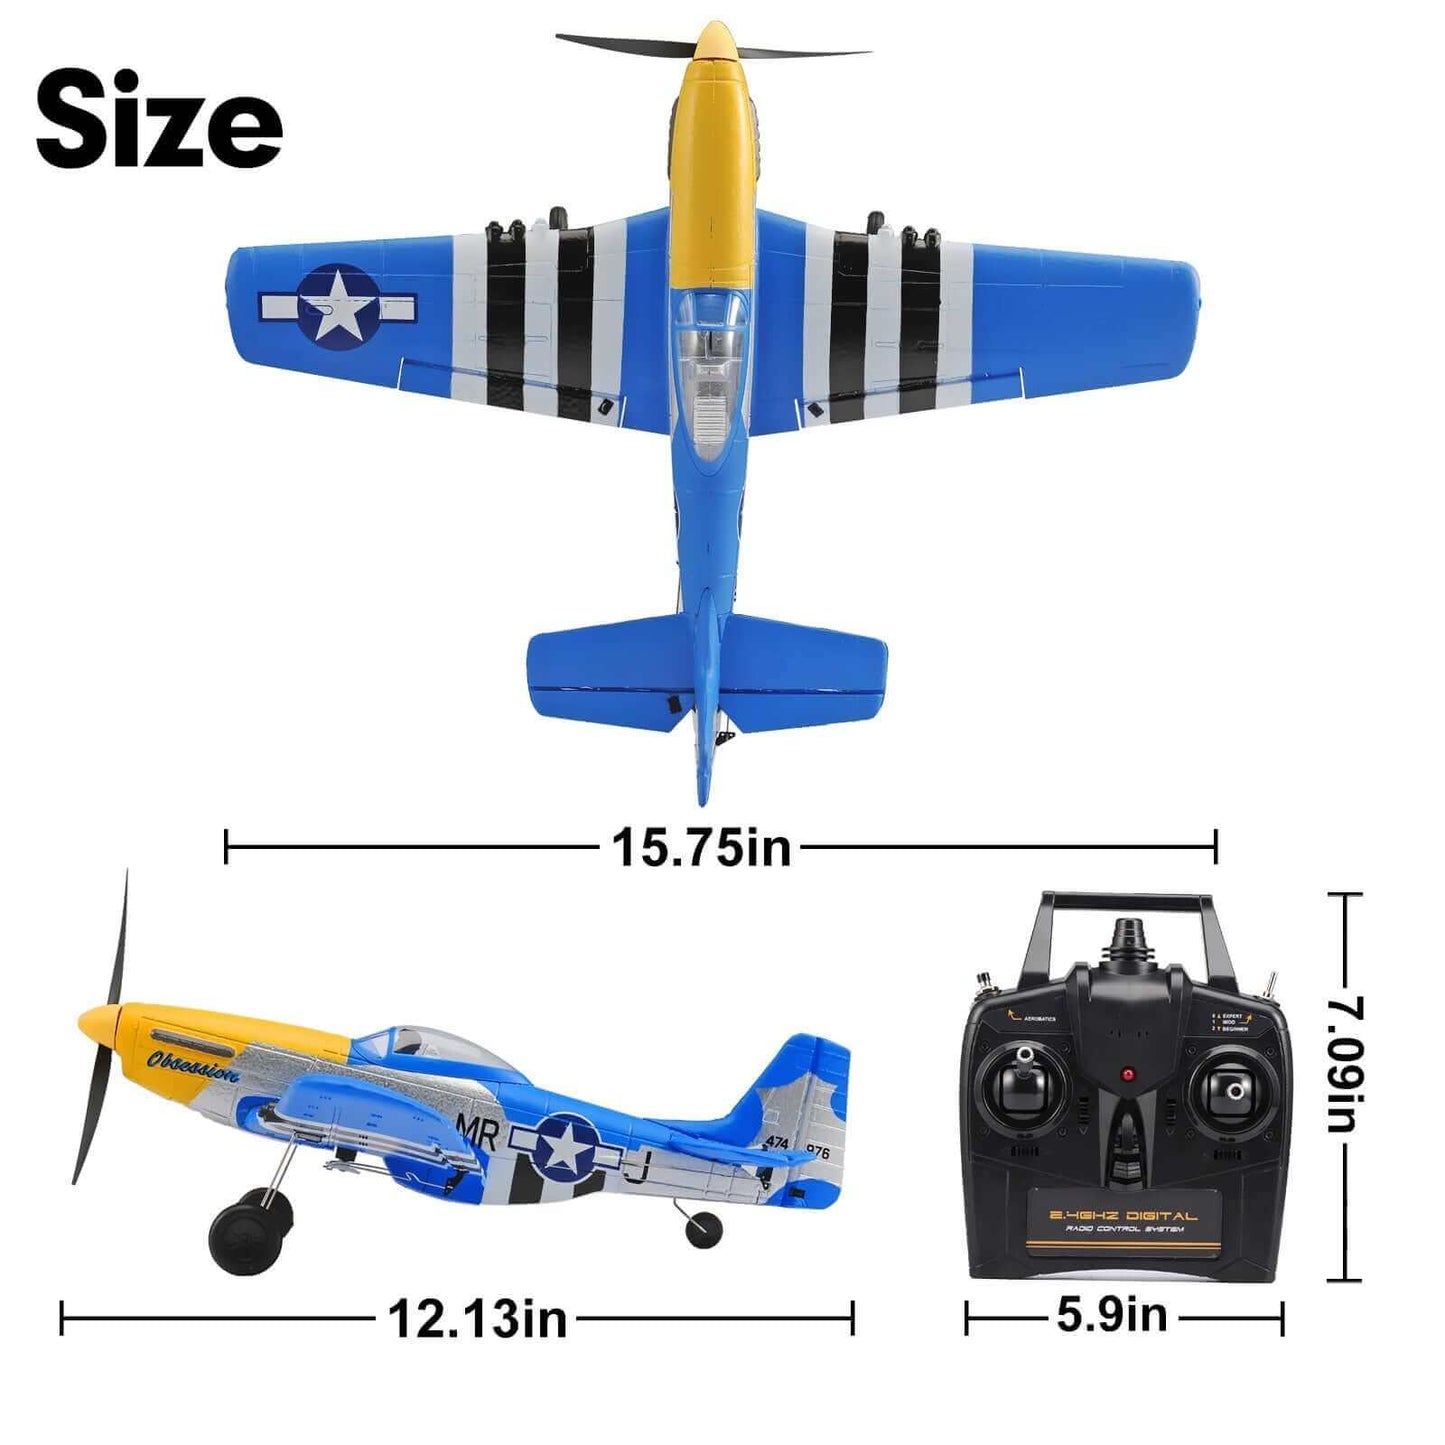 P51D Mustang size - Kids toy lover